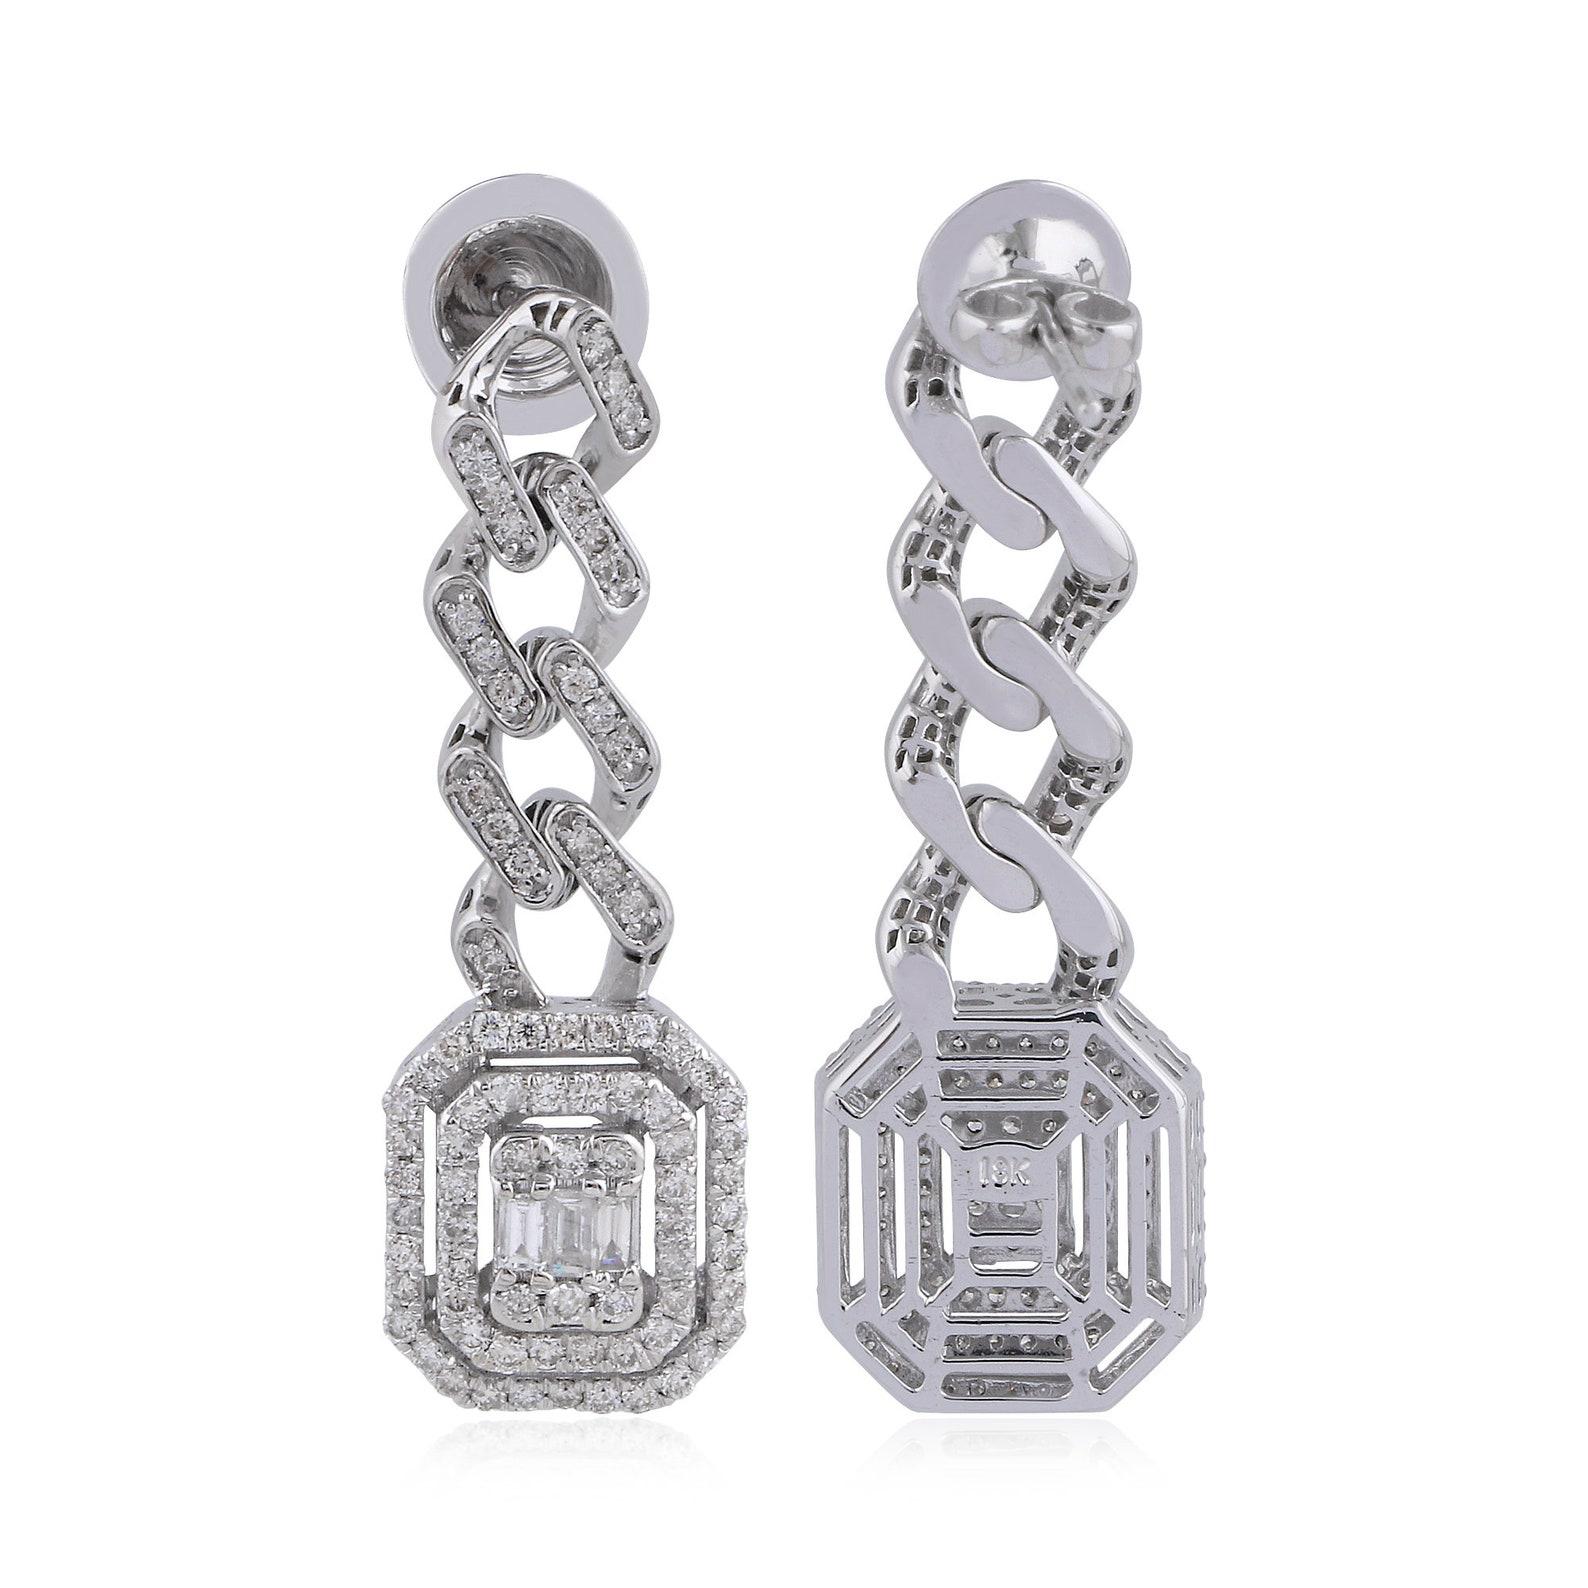 These earrings are handcrafted in 14-karat white gold and set in 1.0 carats of sparkling diamonds. Available in white, rose and yellow gold.  See matching necklace that compliments with these earrings.

FOLLOW MEGHNA JEWELS storefront to view the